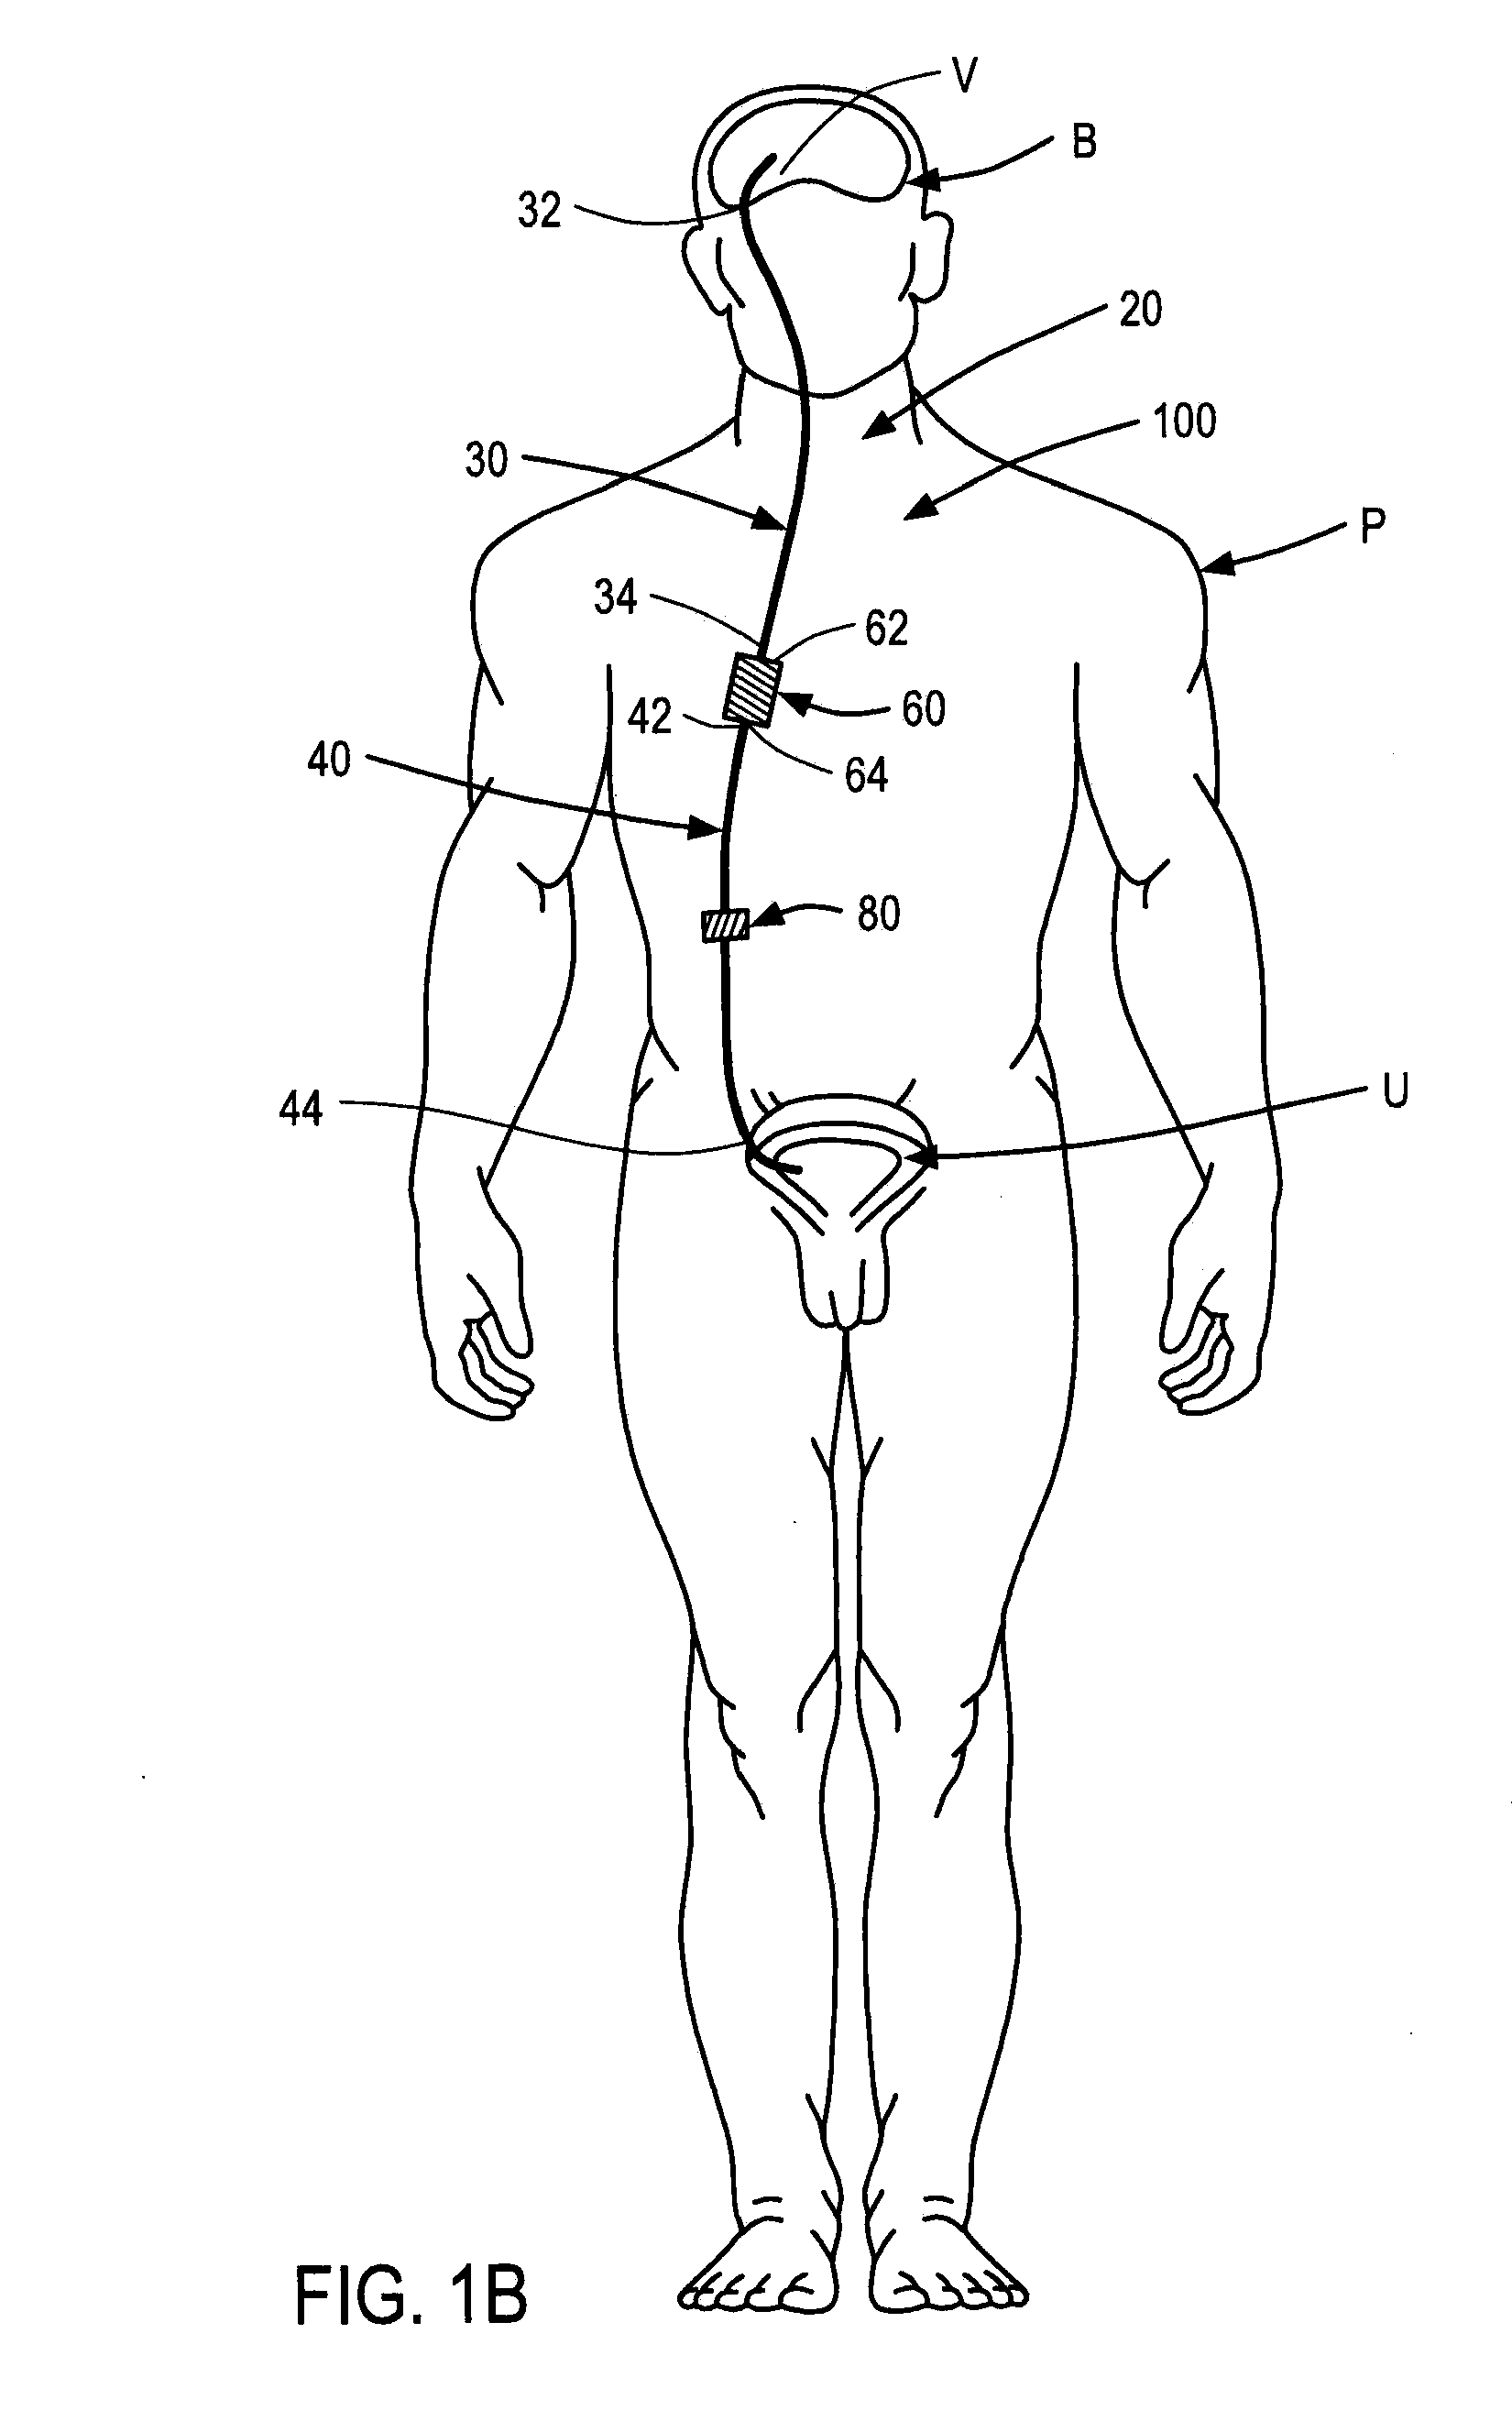 Systems and methods for moving and circulating fluid to treat alzheimer's disease